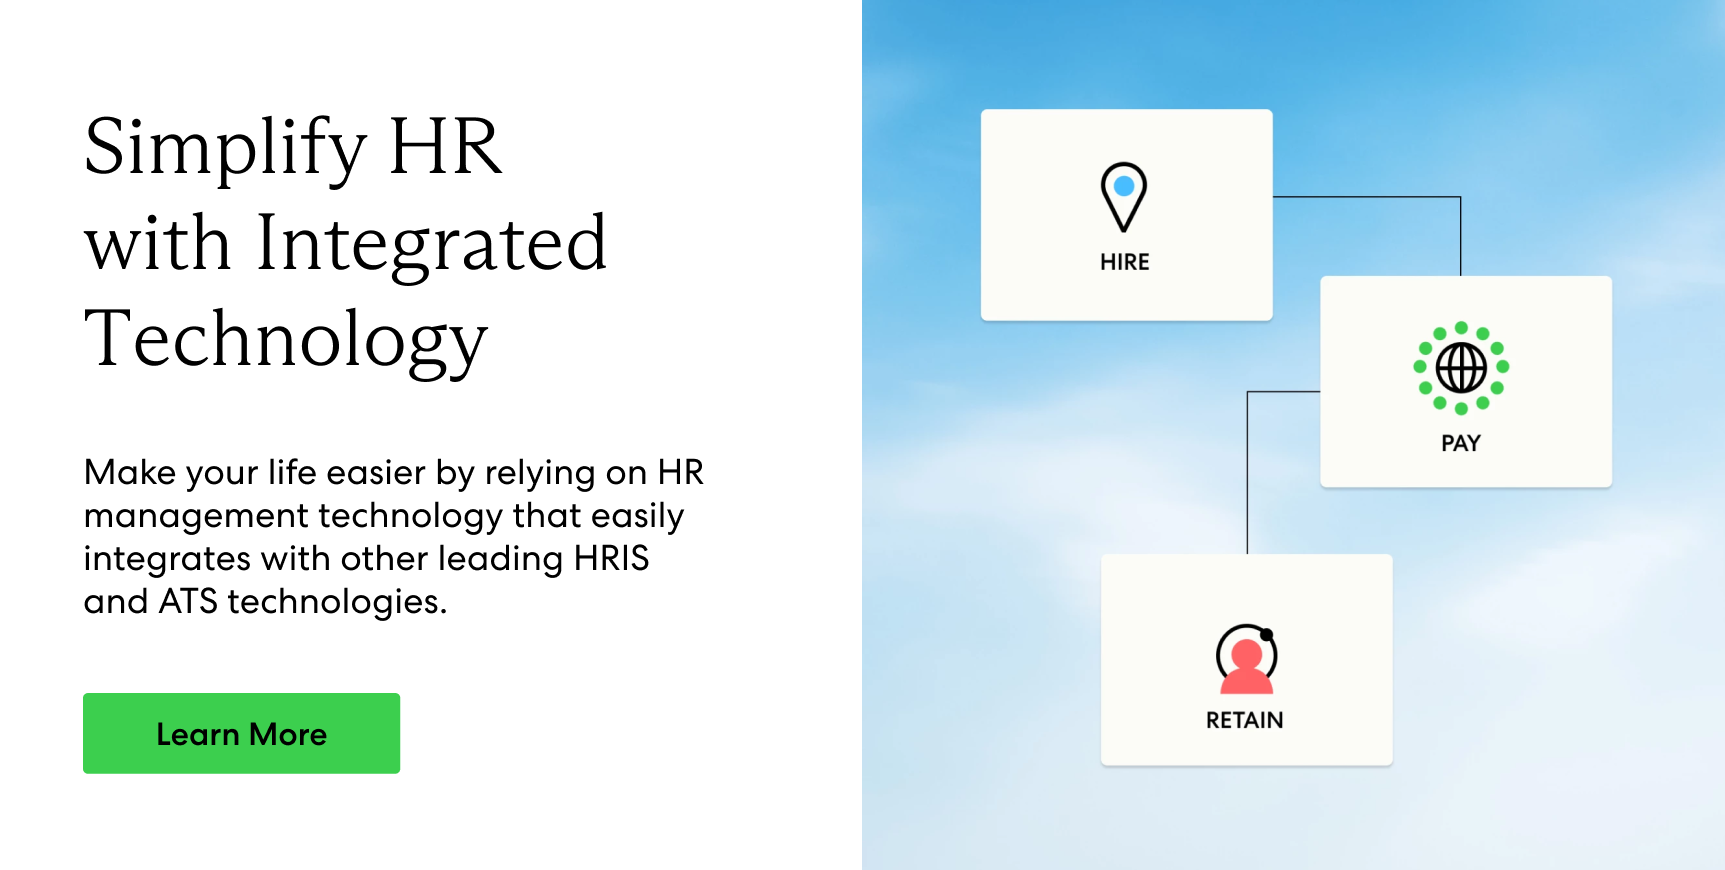 Make your life easier by relying on HR management technology that easily integrates with other leading HRIS and ATS technologies. 